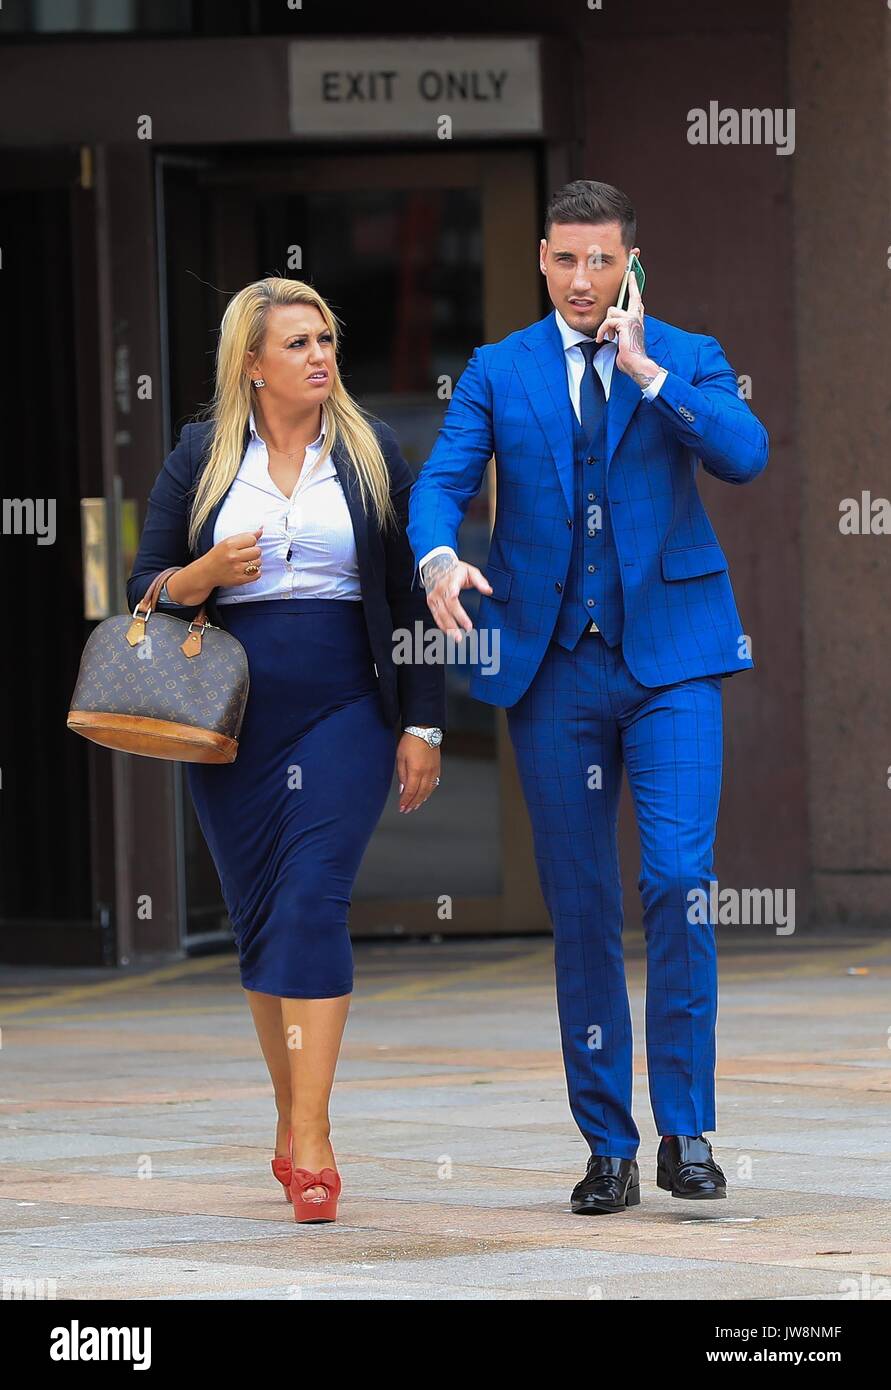 Reality TV star Jeremy McConnell outside Liverpool magistrates Court where he is to be sentenced for assaulting ex-girlfriend Stephanie Davis. Stock Photo